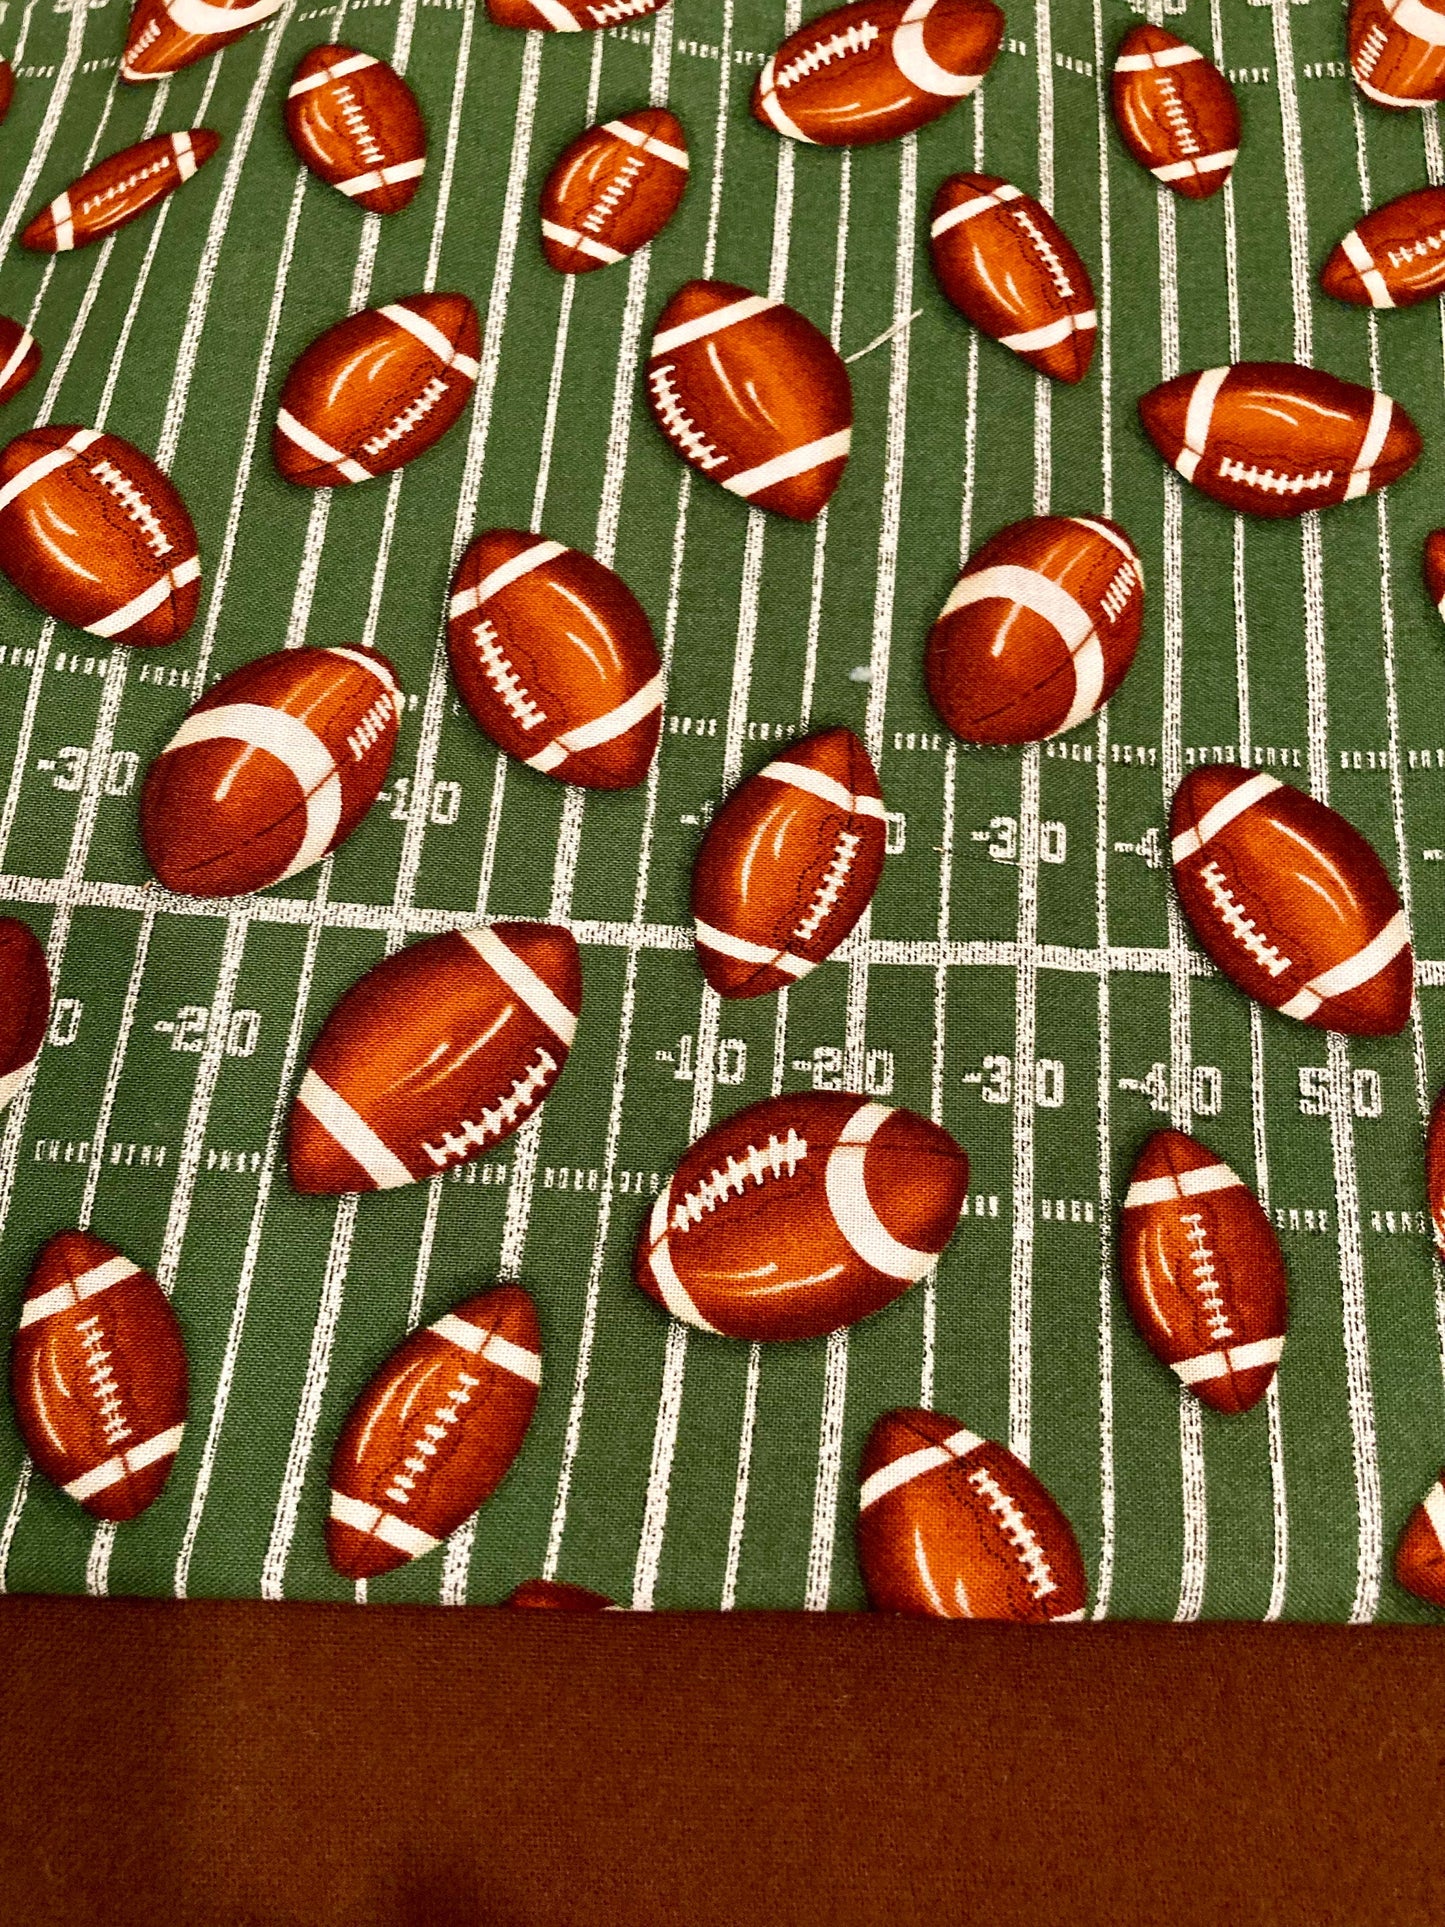 Perfect football gift and blanket!